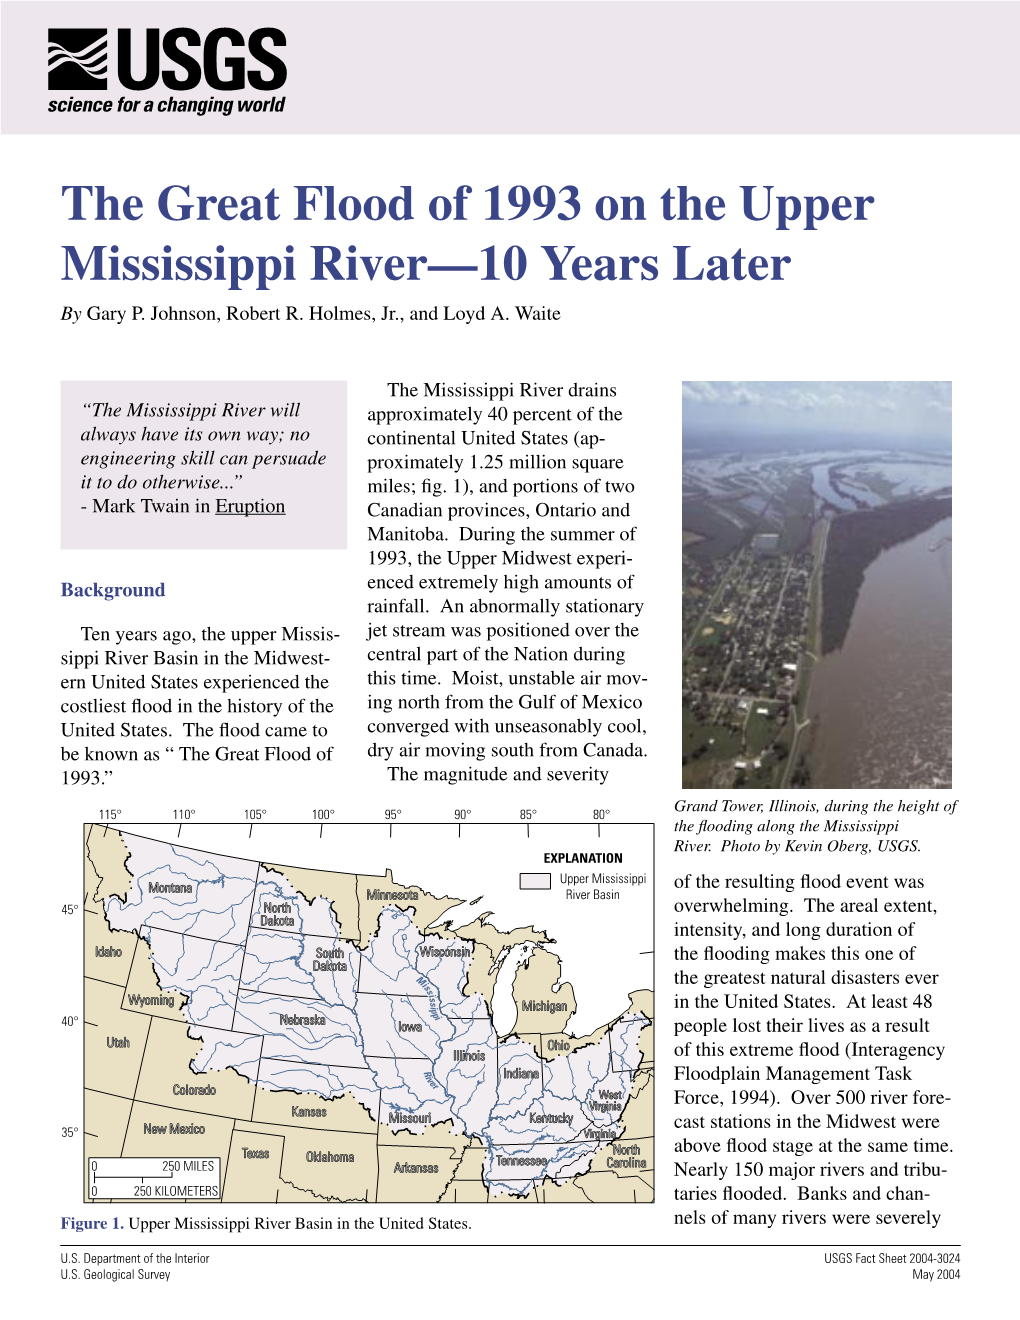 The Great Flood of 1993 on the Upper Mississippi River—10 Years Later by Gary P